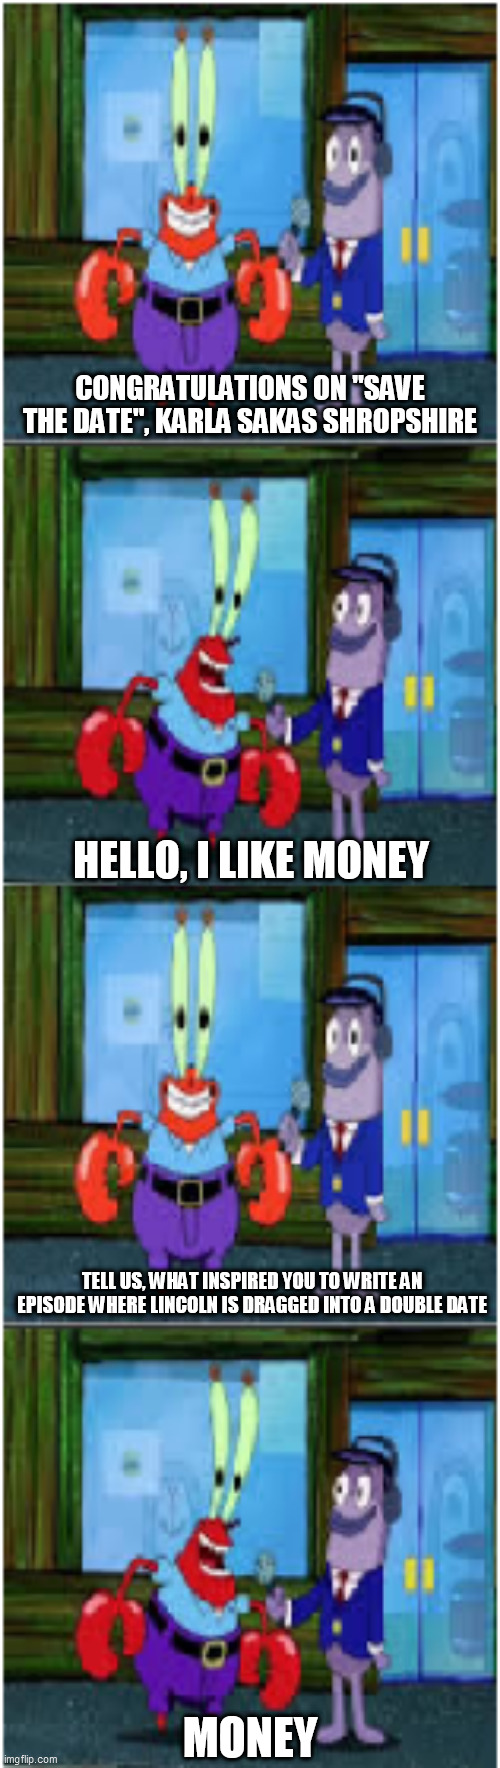 Mr. Krabs Money Extended | CONGRATULATIONS ON "SAVE THE DATE", KARLA SAKAS SHROPSHIRE; HELLO, I LIKE MONEY; TELL US, WHAT INSPIRED YOU TO WRITE AN EPISODE WHERE LINCOLN IS DRAGGED INTO A DOUBLE DATE; MONEY | image tagged in mr krabs money extended,loud house,the loud house,save the date,money,hello i like money | made w/ Imgflip meme maker